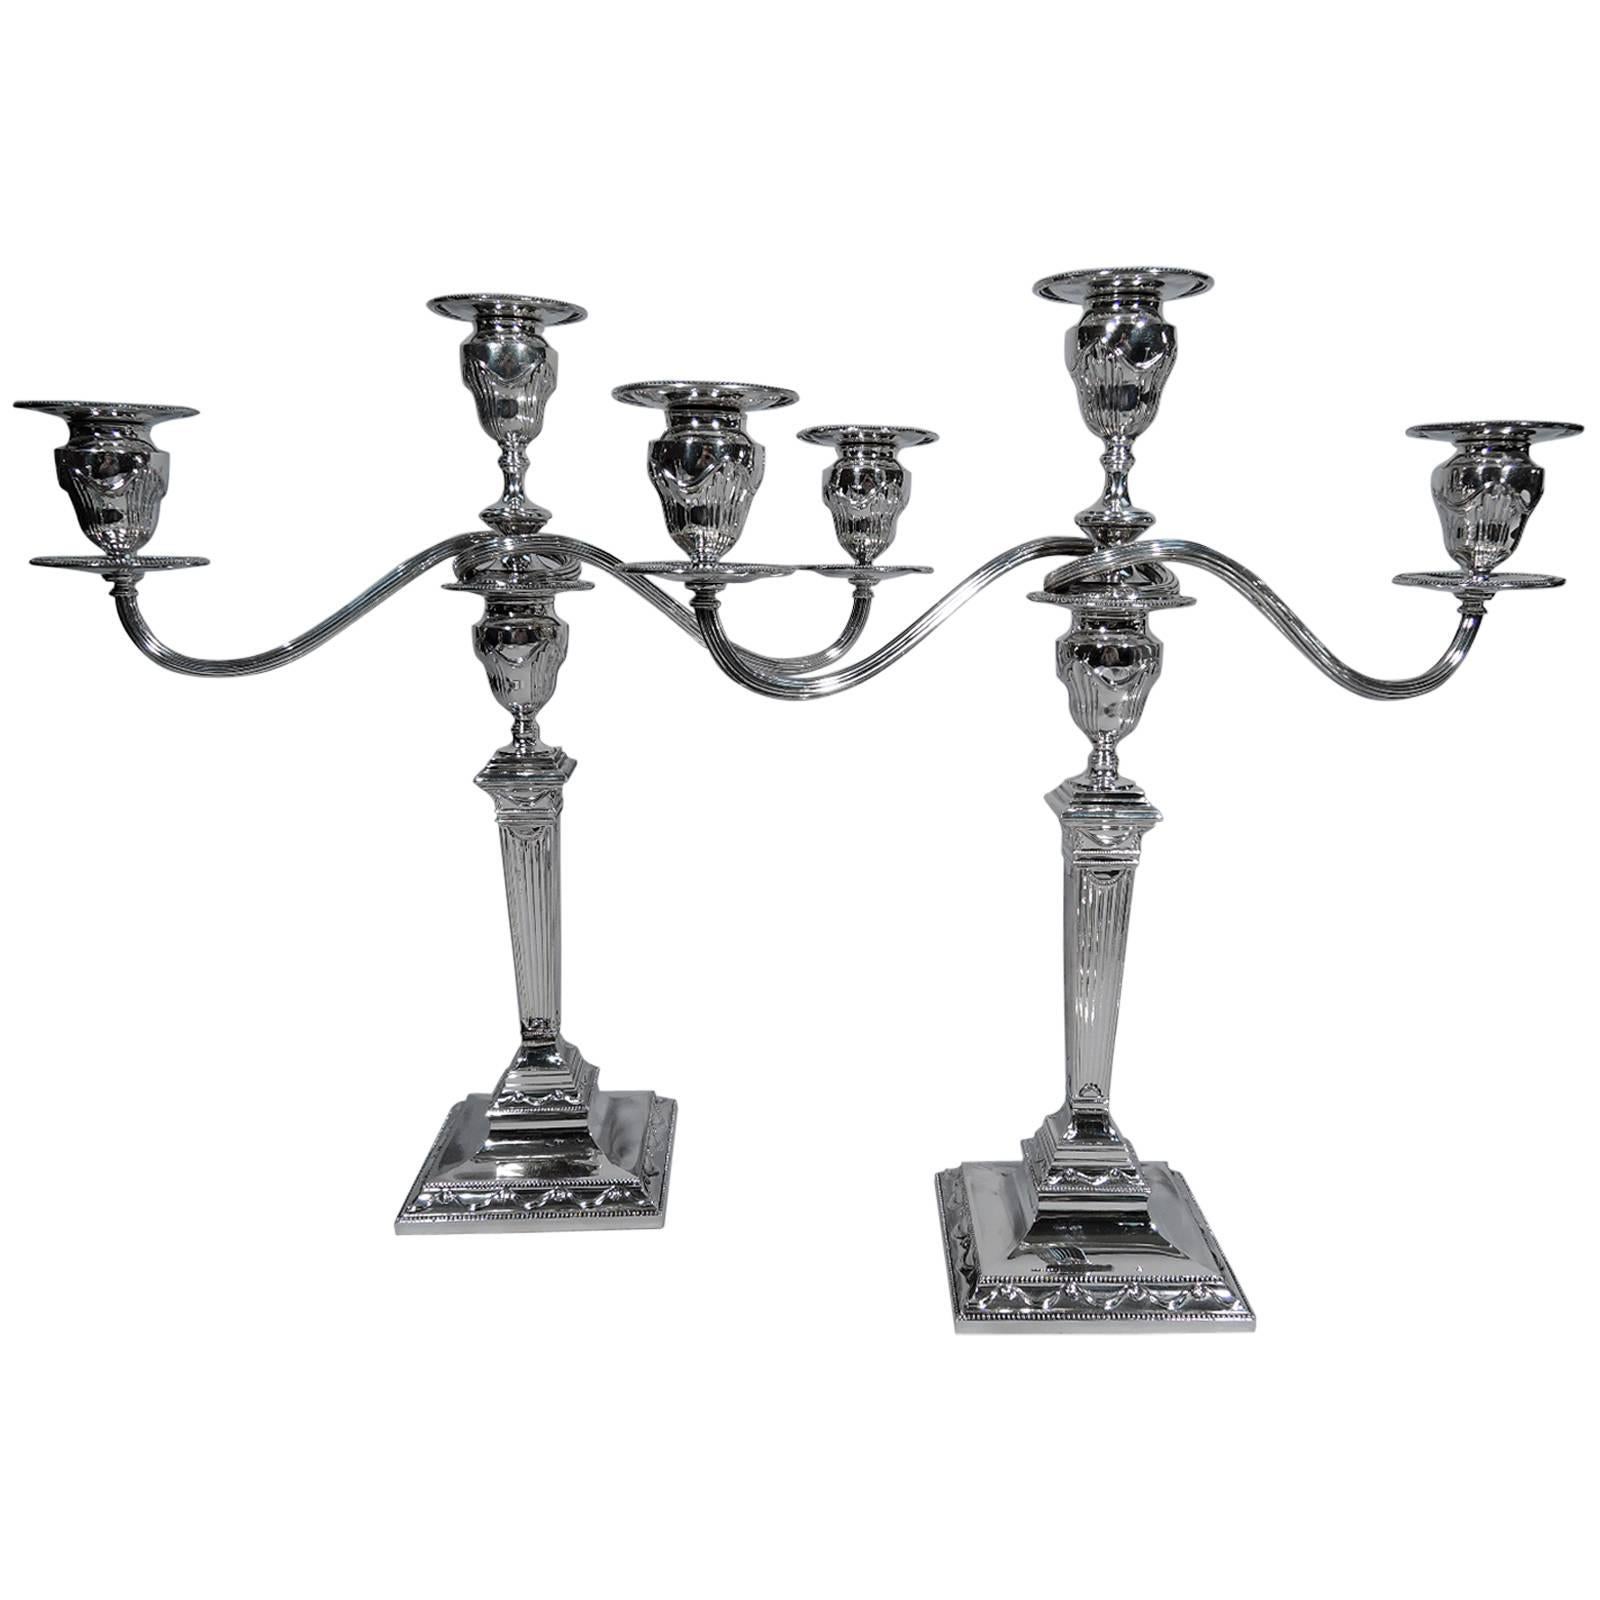 Tiffany Sterling Silver Candelabra after English Neoclassical